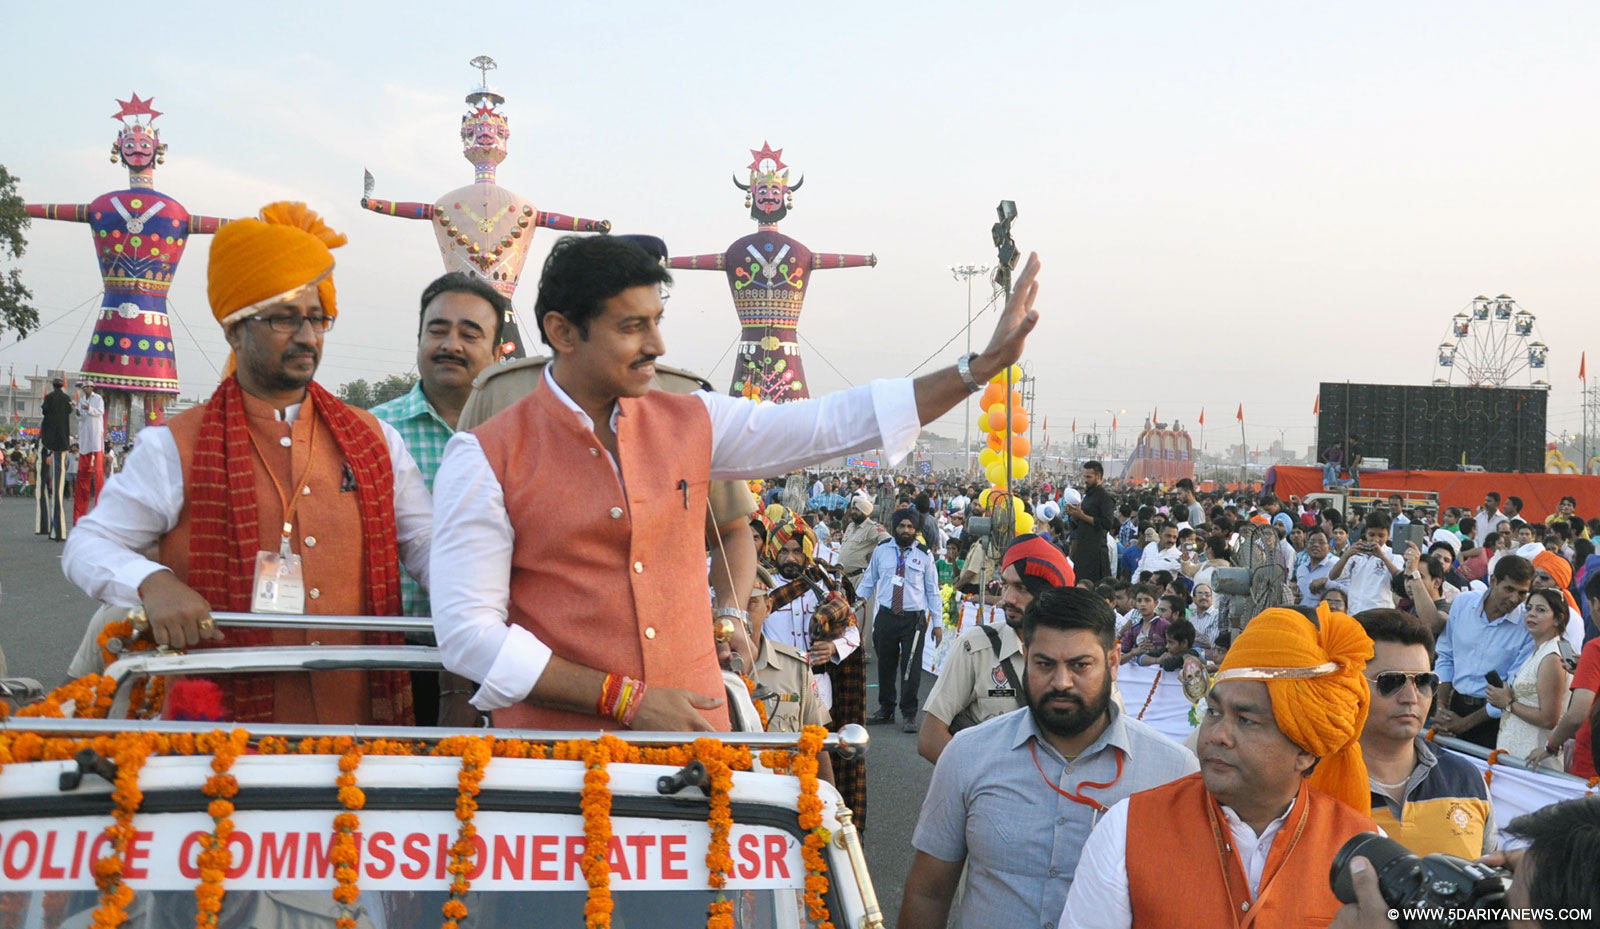 The Minister of State for Information & Broadcasting, Col. Rajyavardhan Singh Rathore addressing the gathering on the occasion of Vijaydashmi, in Amritsar, Punjab on October 22, 2015.